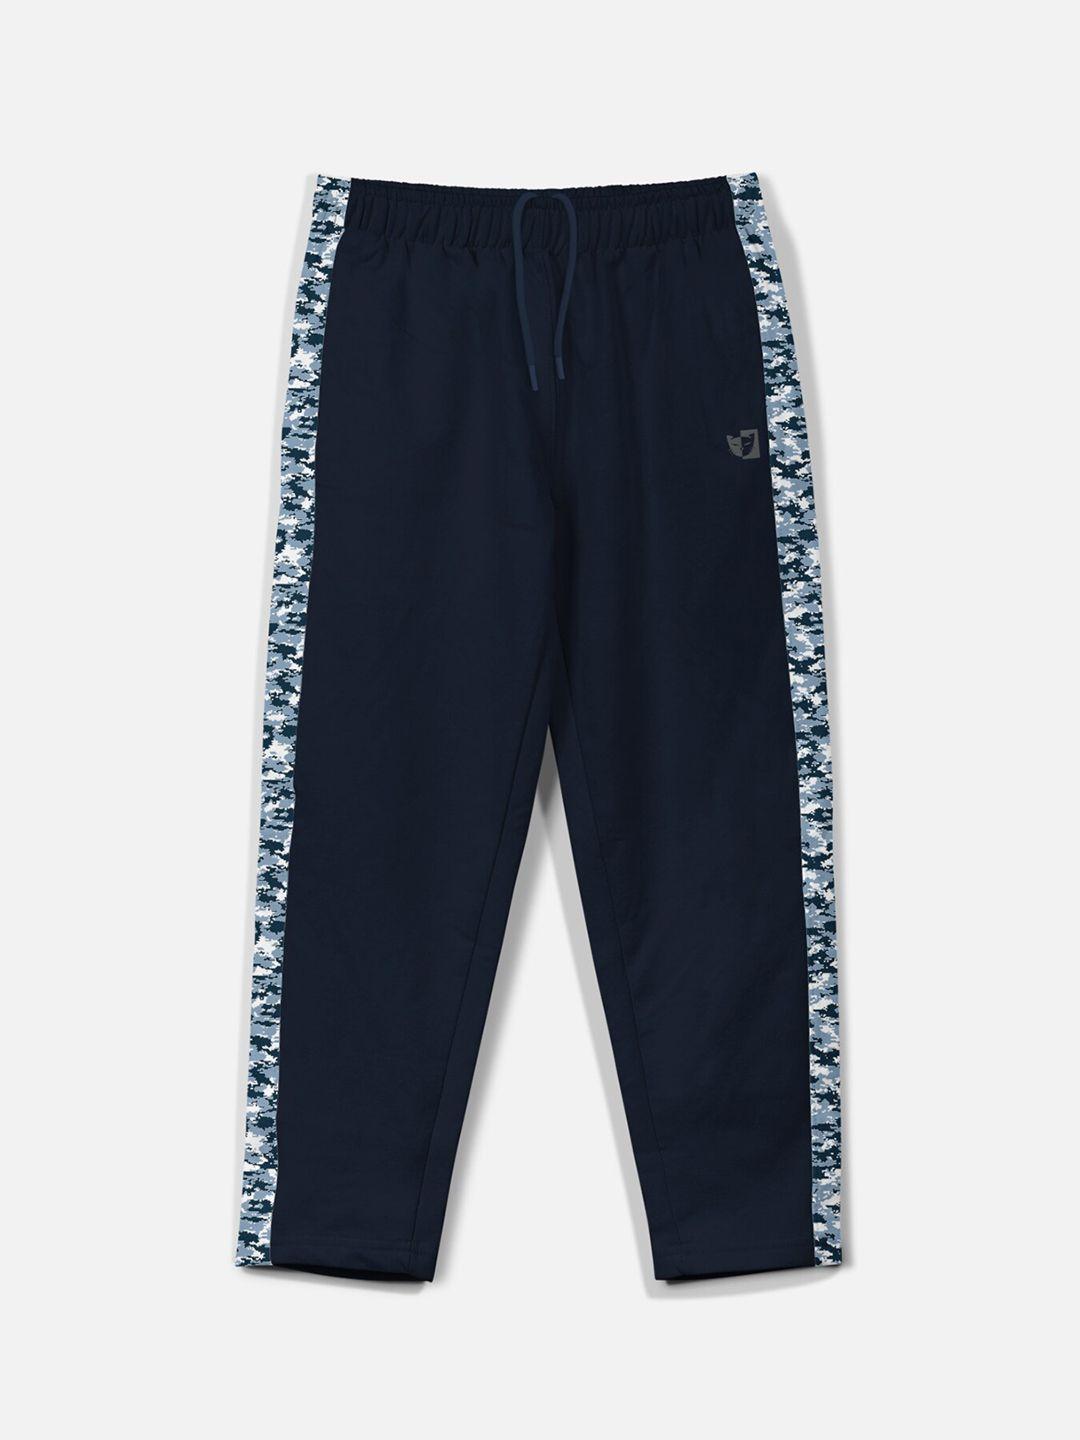 hellcat-boys-camouflage-printed-track-pants